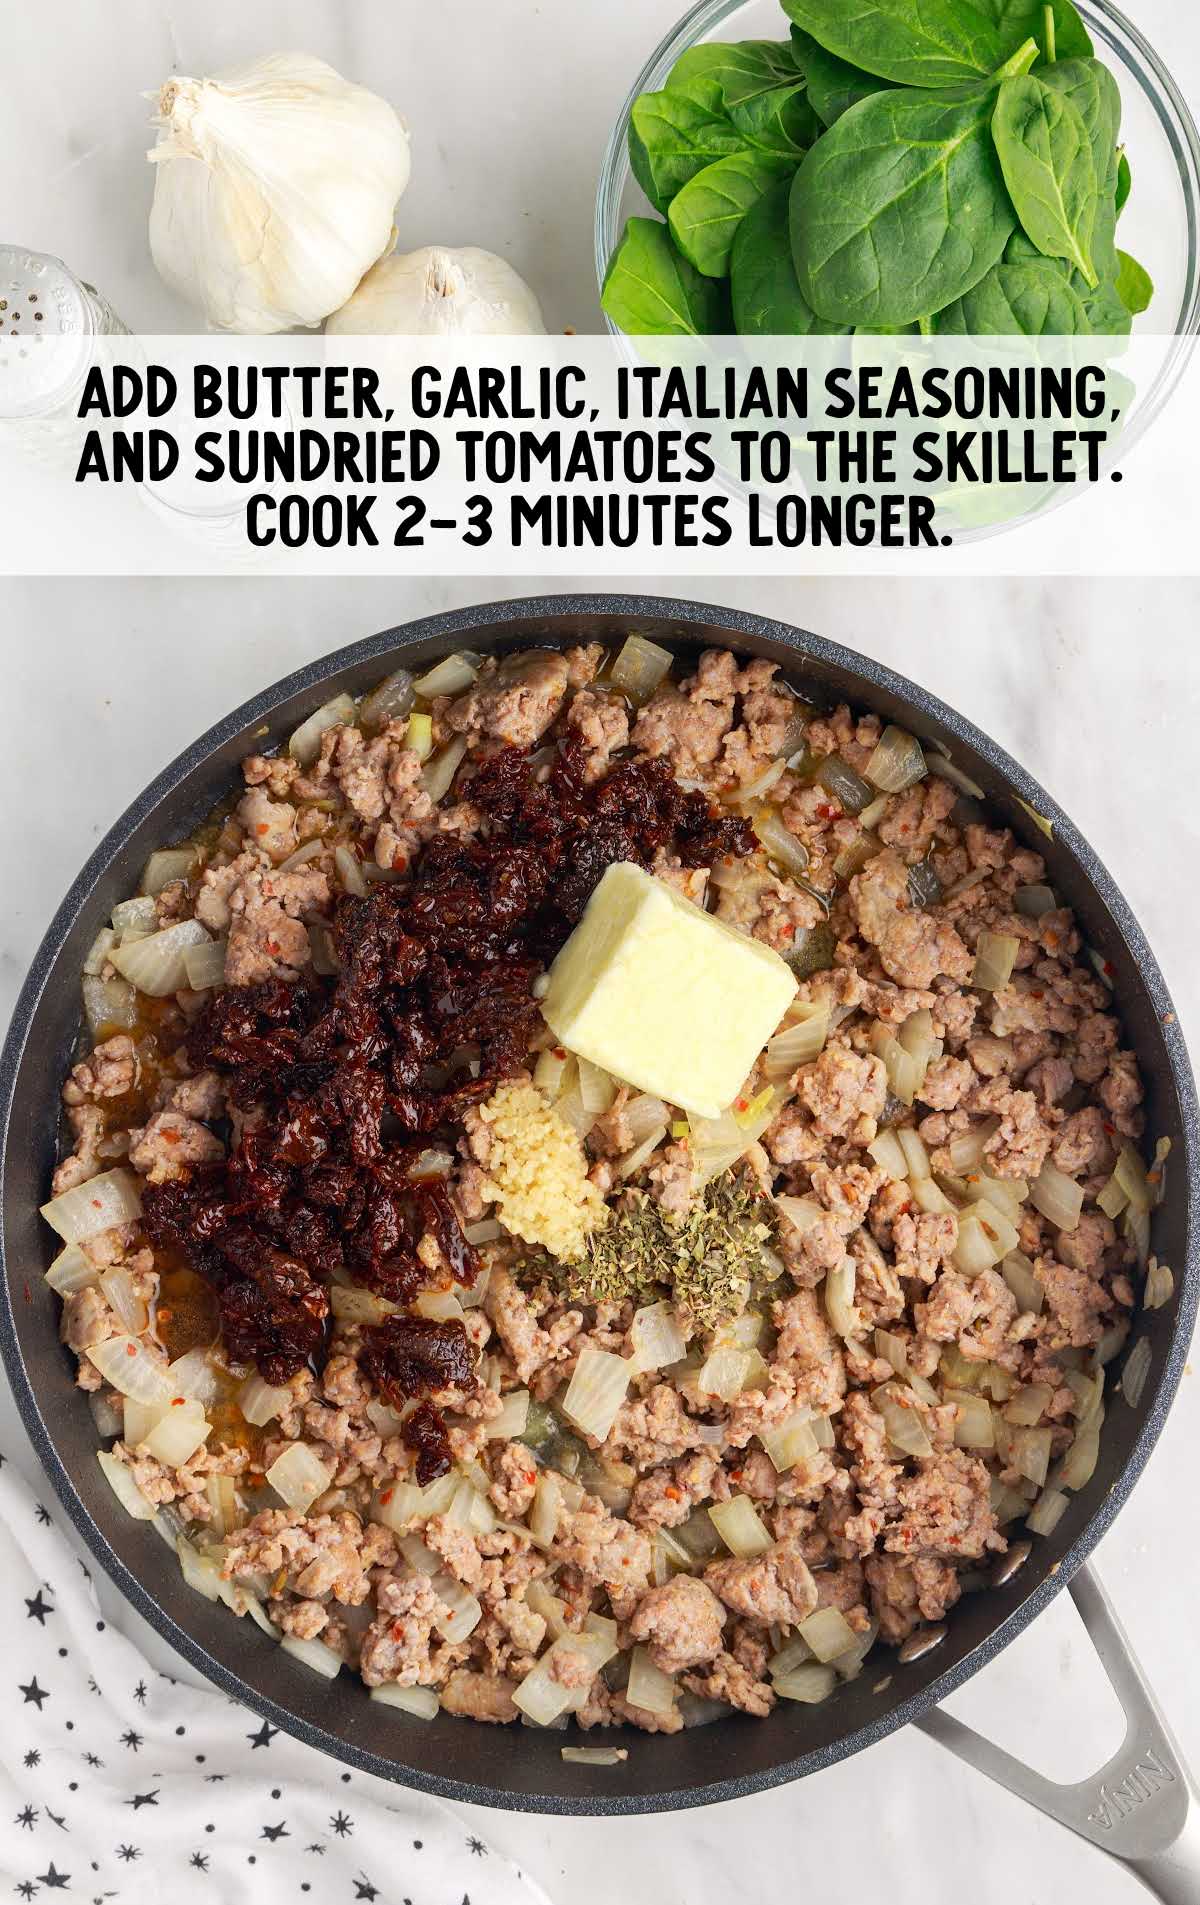 ingredients added to the sausage mixture in a skillet